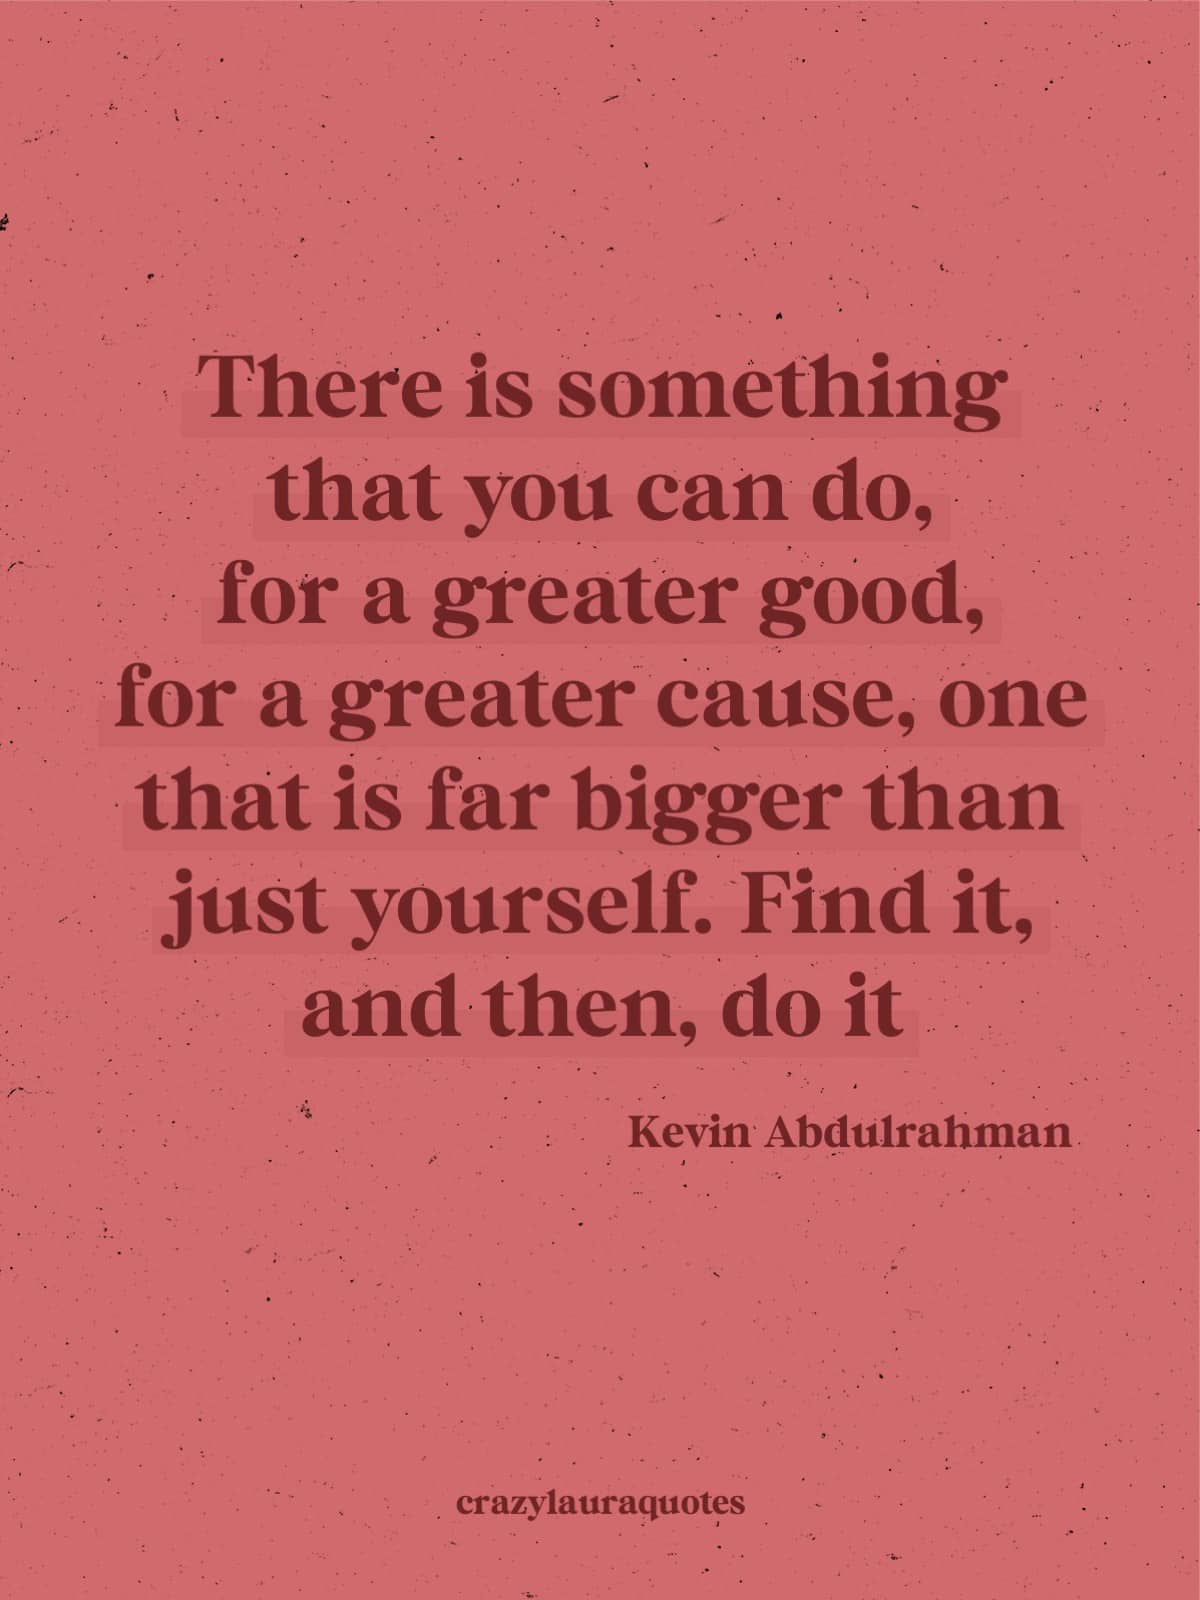 you can do it kevin abdulrahman quote